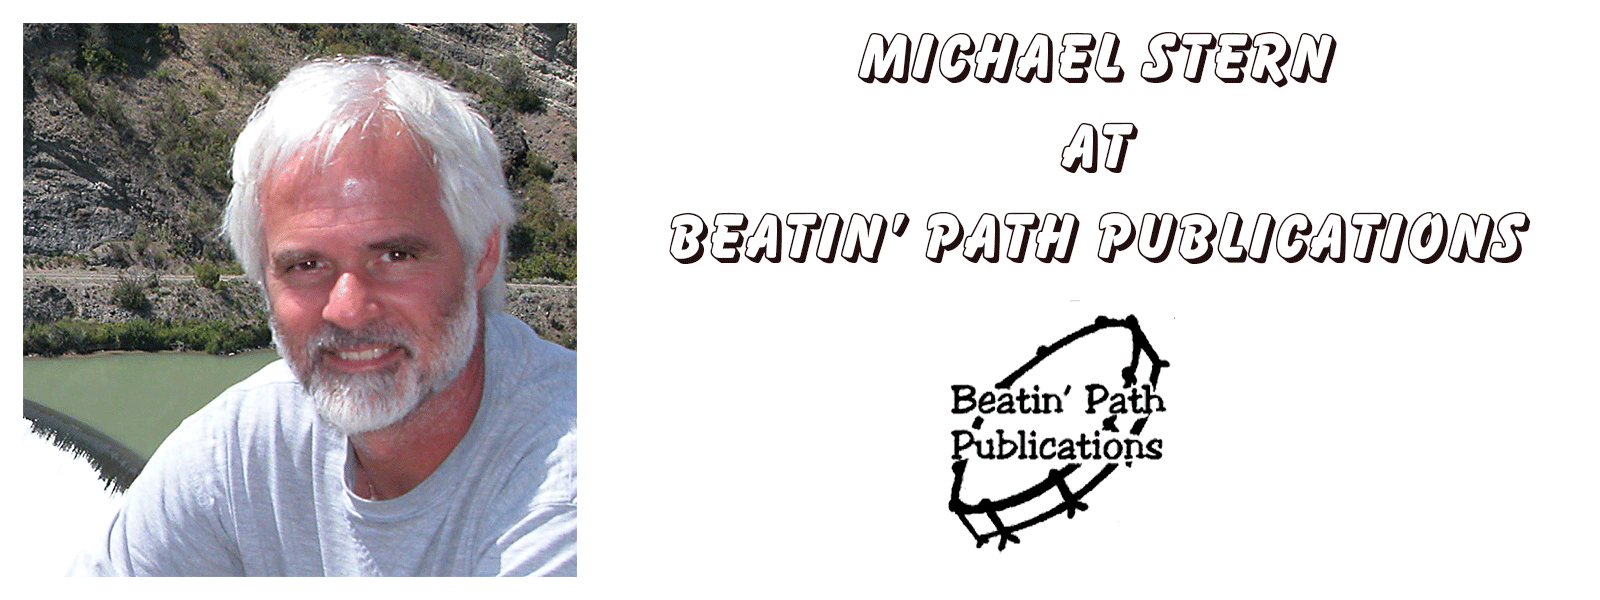 Michael Stern at Beatin' Path Publications